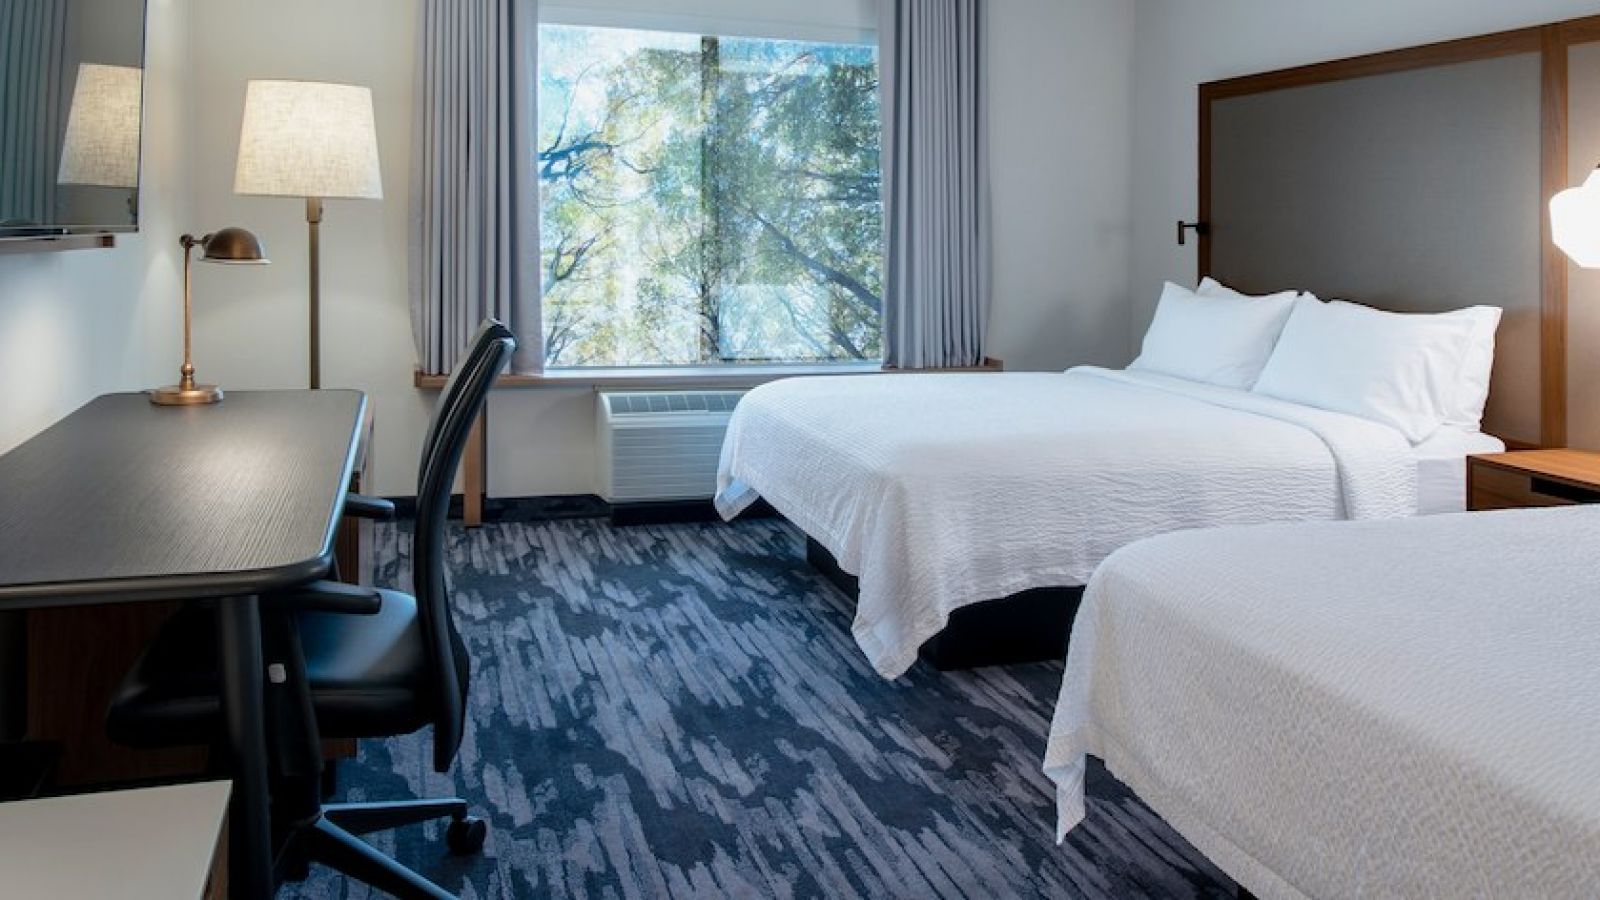 Our newly renovated queen/queen guest room features complimentary Wi-Fi, a large flat-screen TV and a functional work space